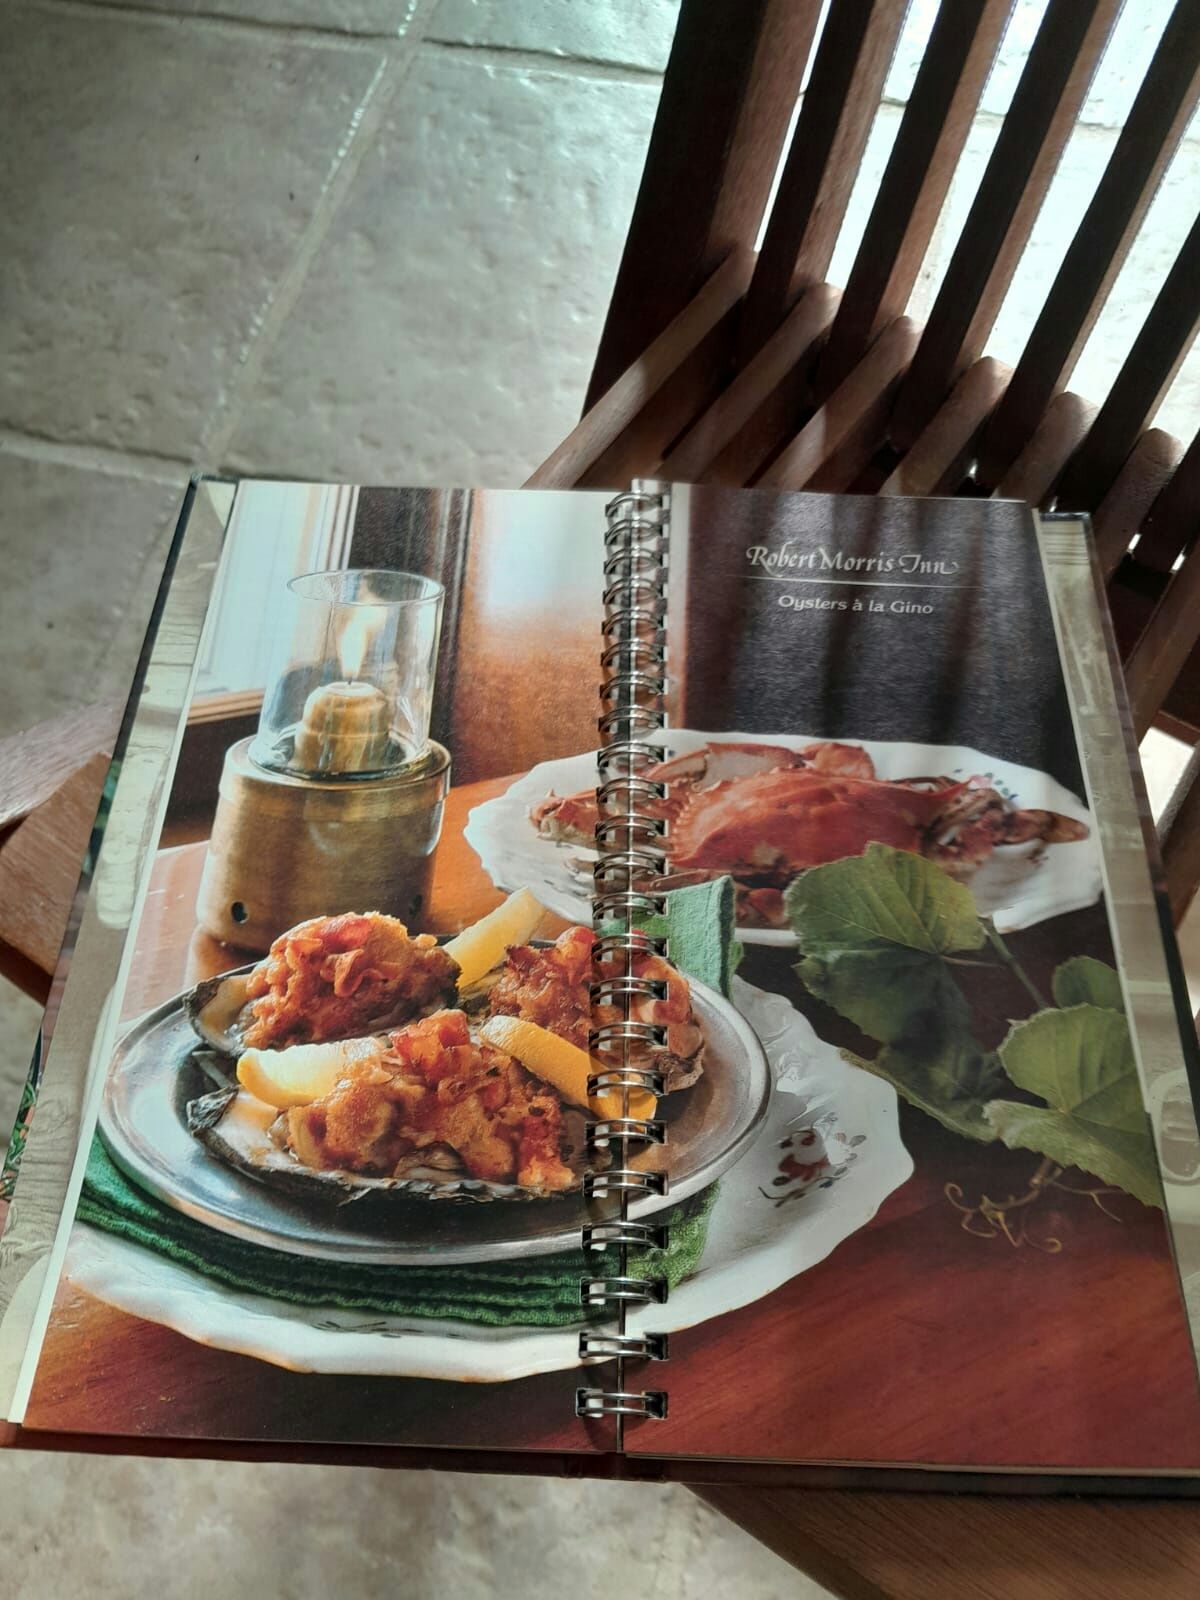 Livro"Recipes from great American Inns" Benson & Hedgs presents.